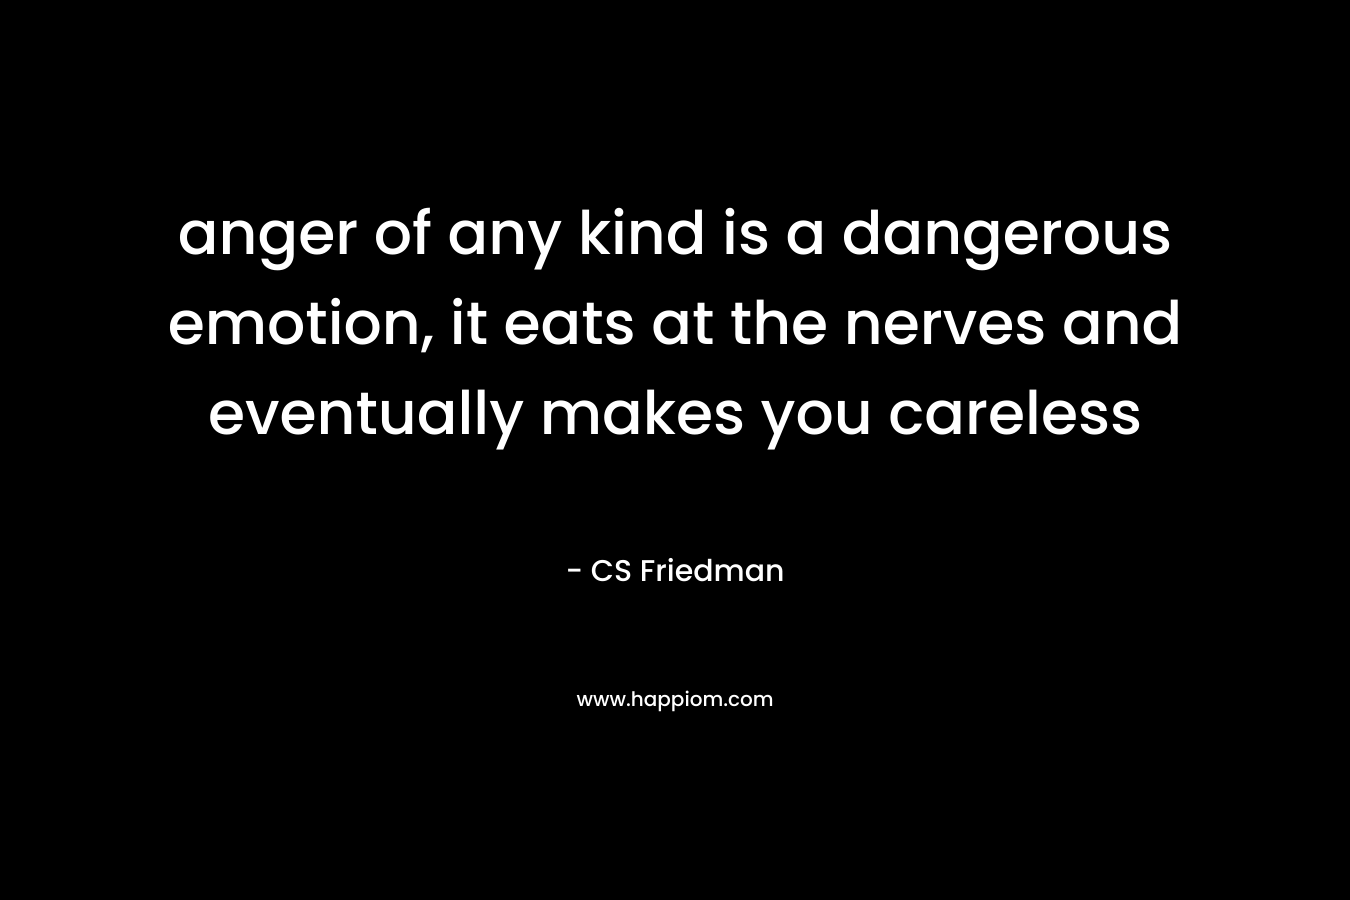 anger of any kind is a dangerous emotion, it eats at the nerves and eventually makes you careless